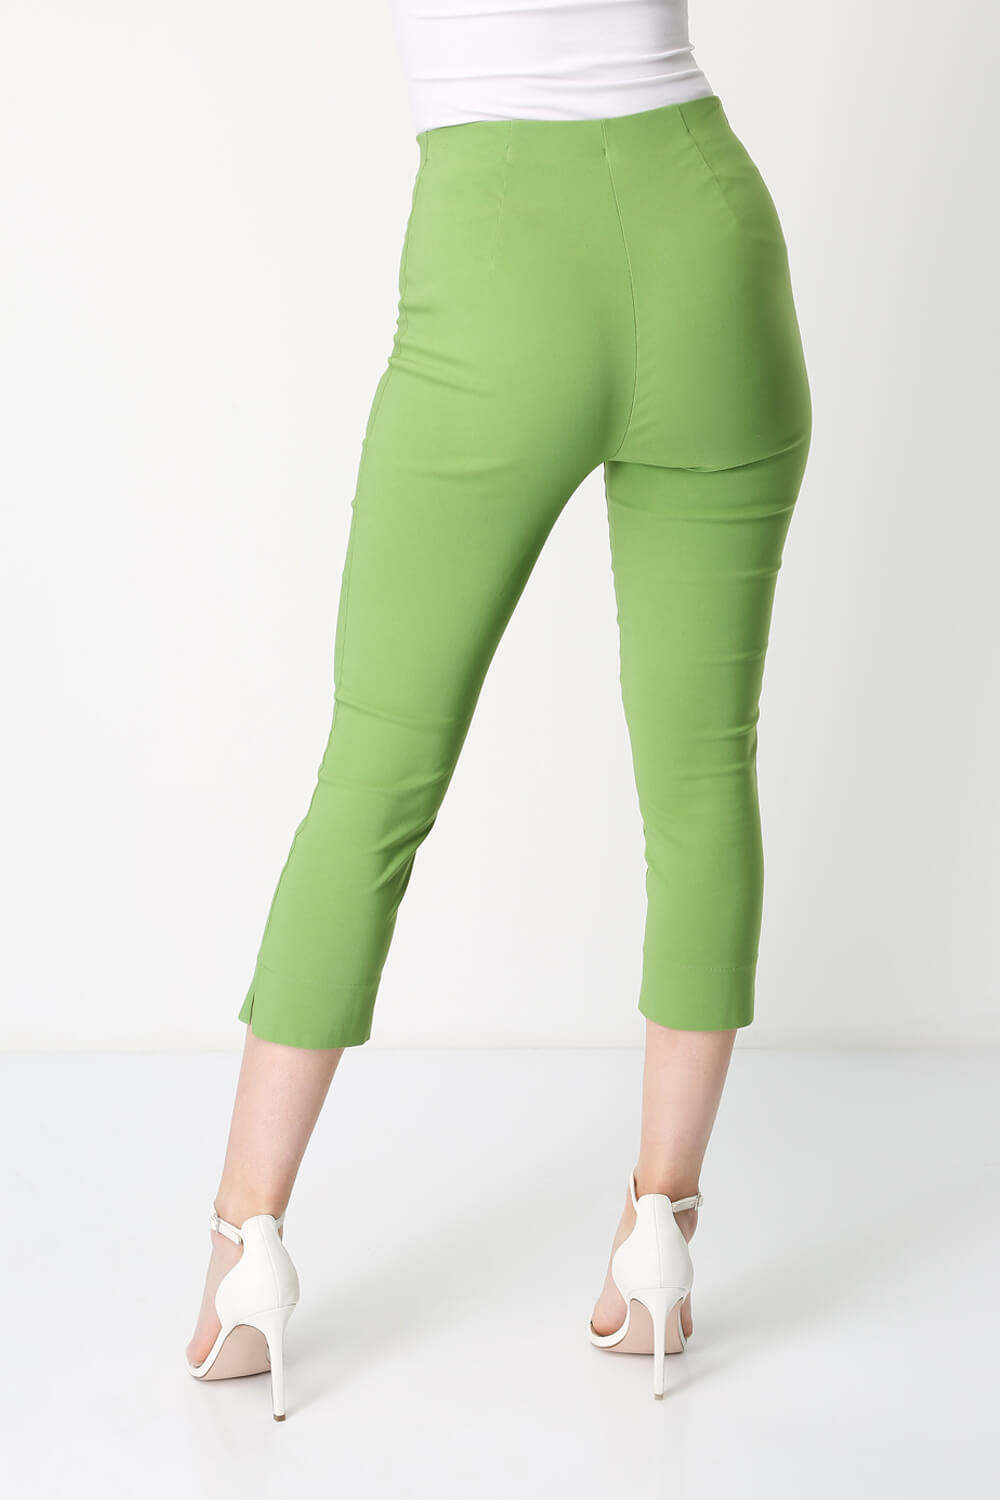 Pale Green Cropped Stretch Trouser, Image 2 of 4